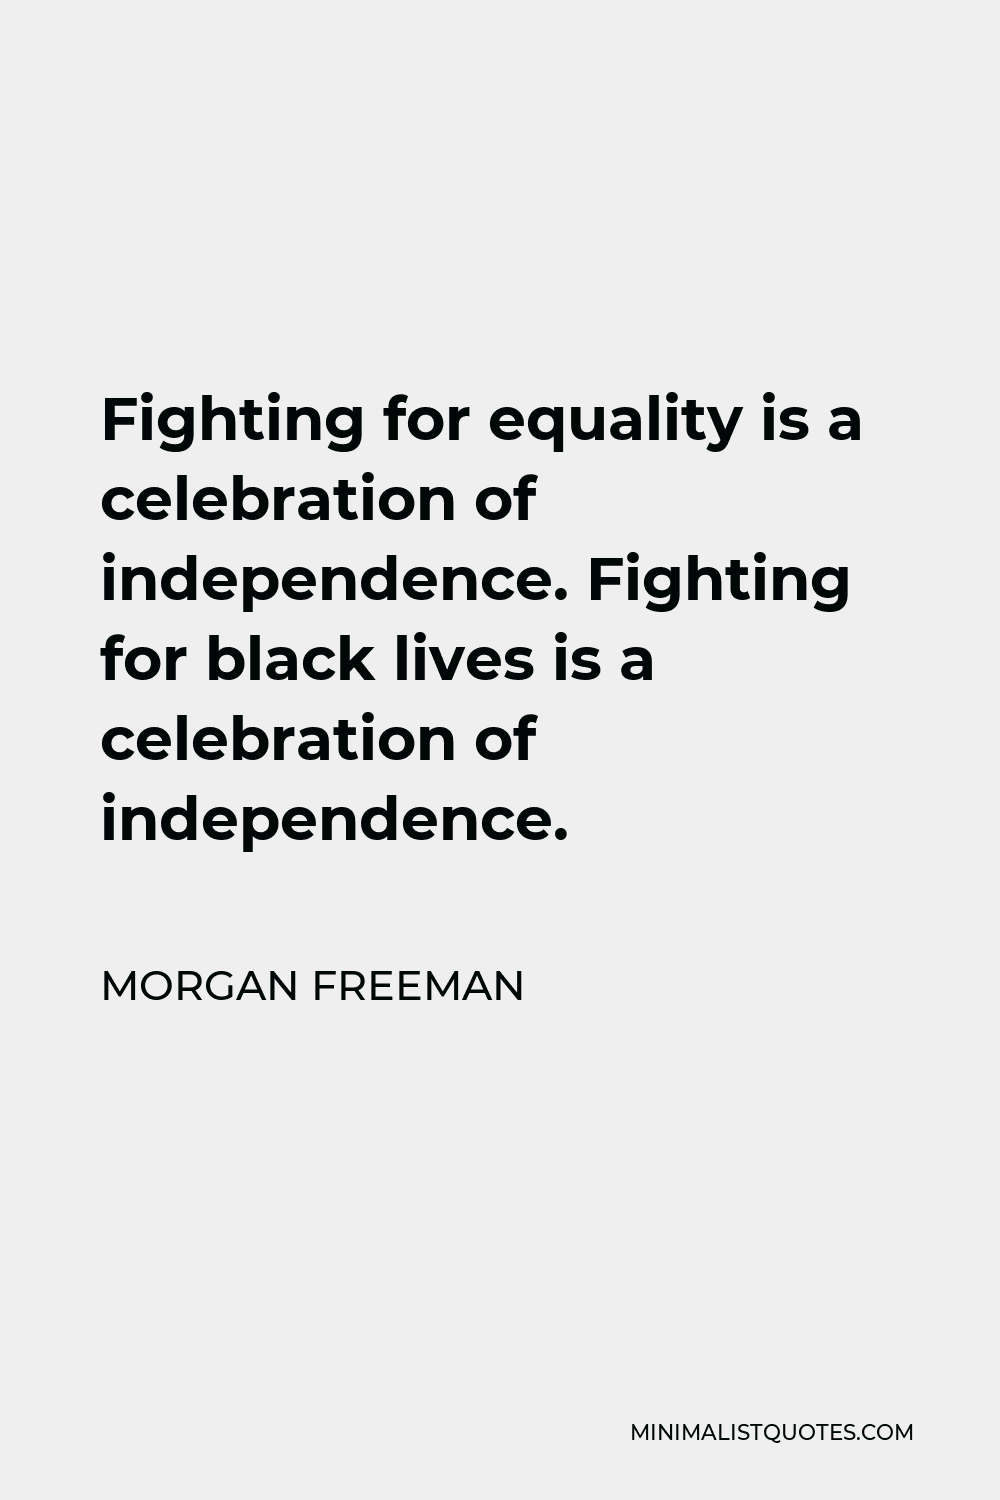 Morgan Freeman Quote - Fighting for equality is a celebration of independence. Fighting for black lives is a celebration of independence.